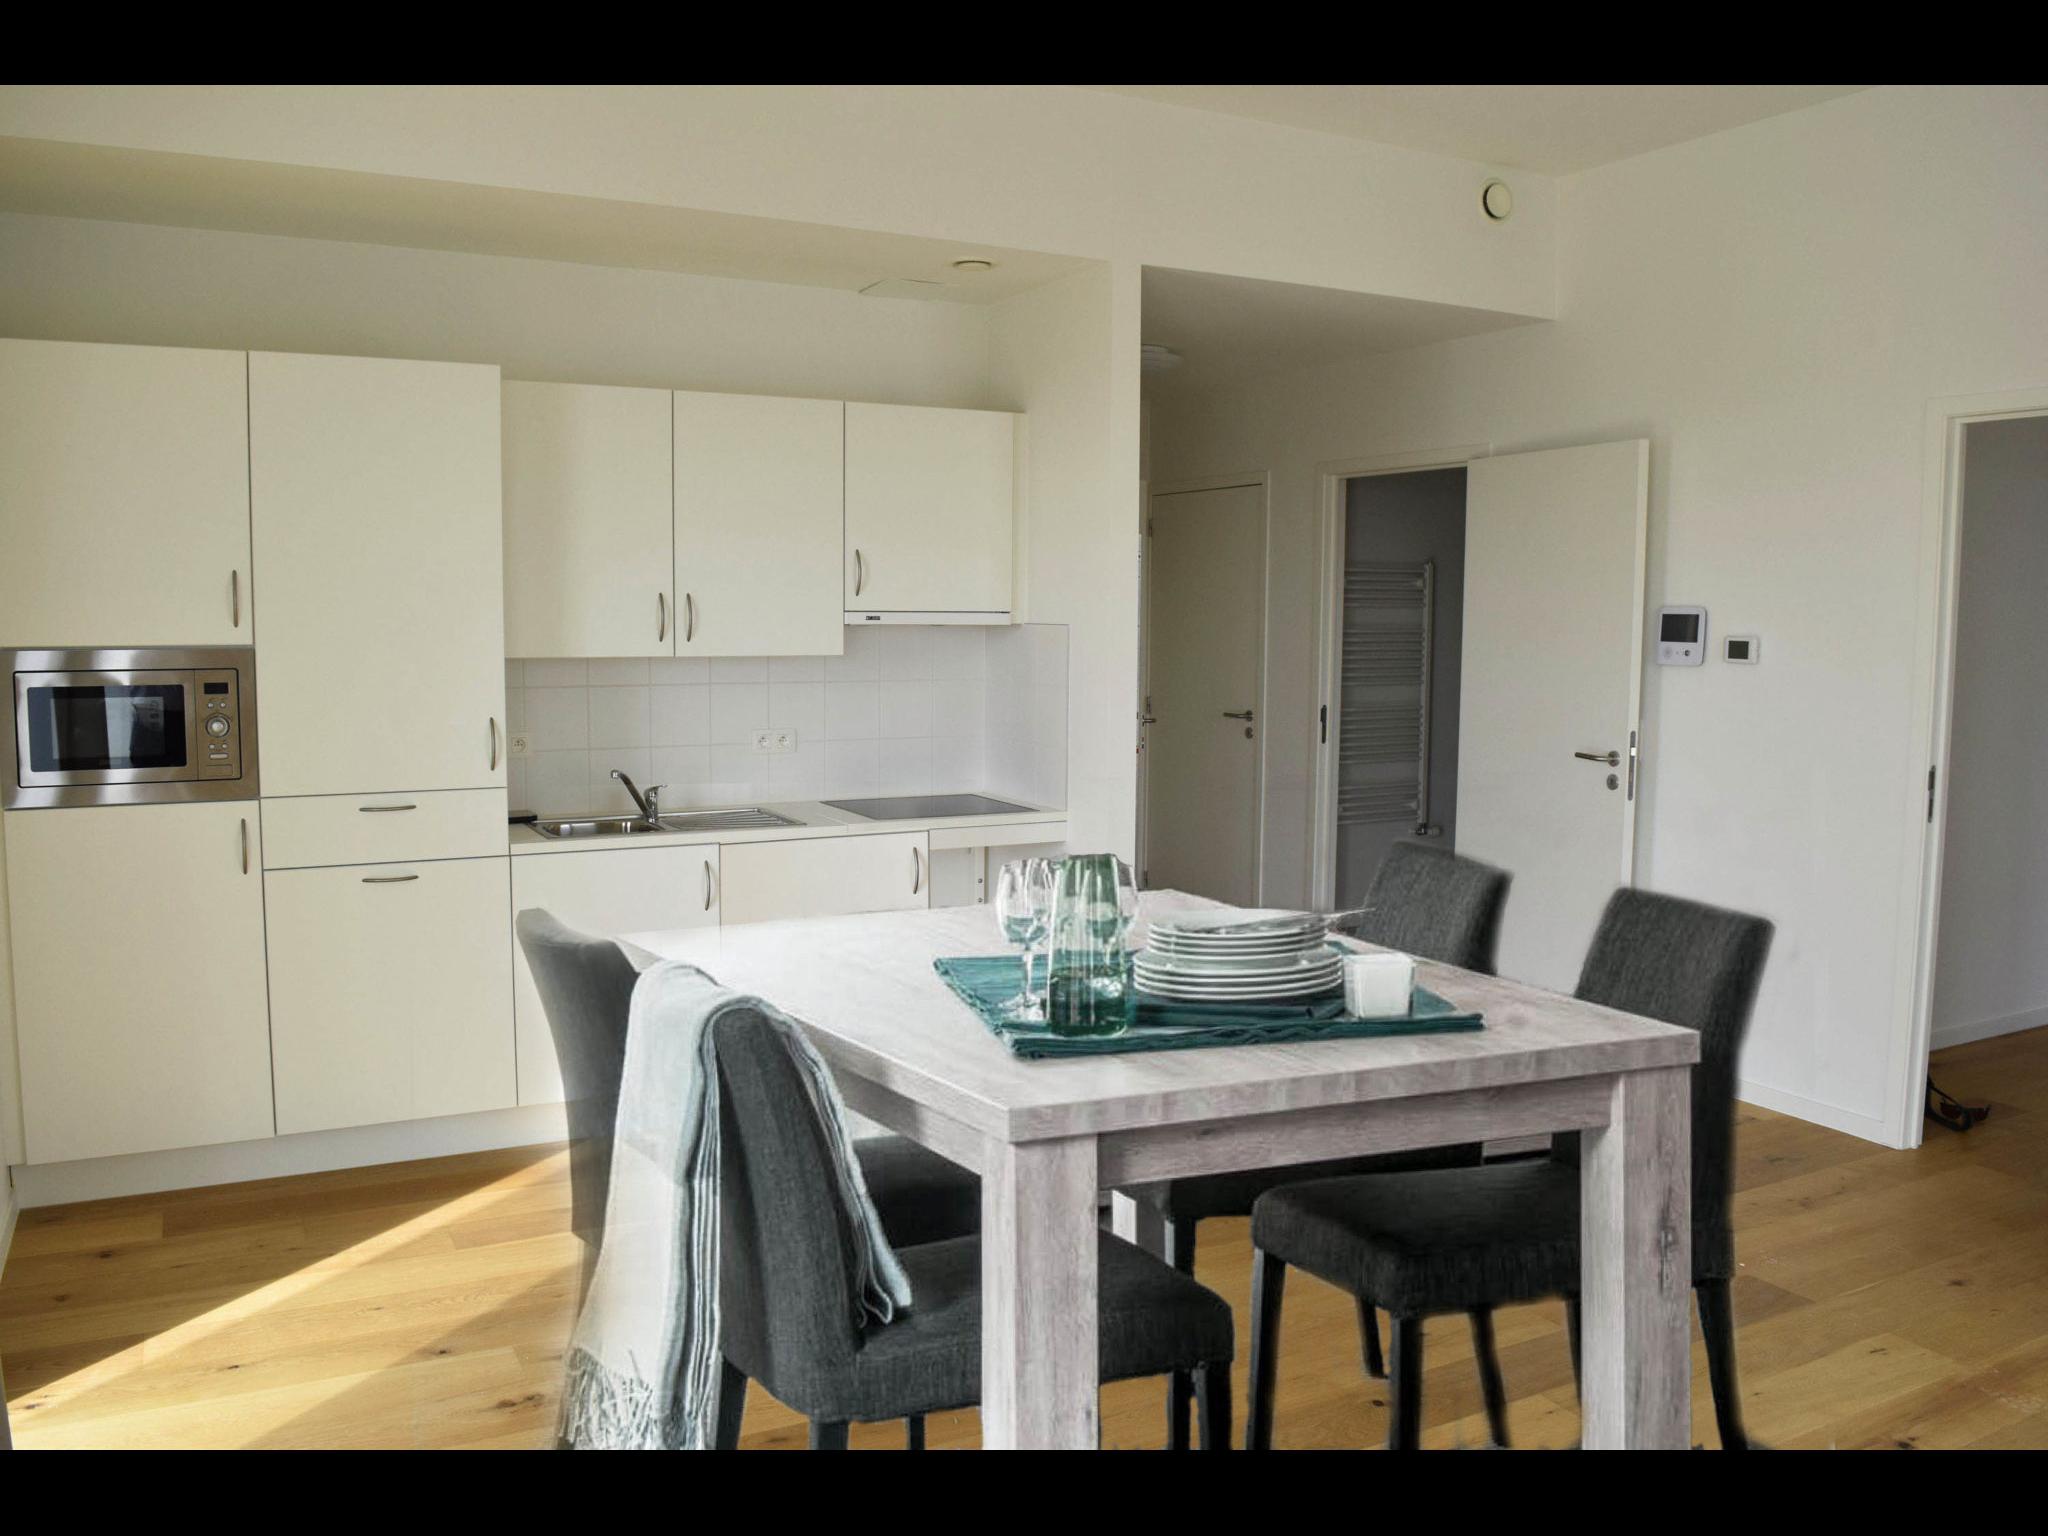 Ellermans - Exclusive apartment in Antwerp for expats